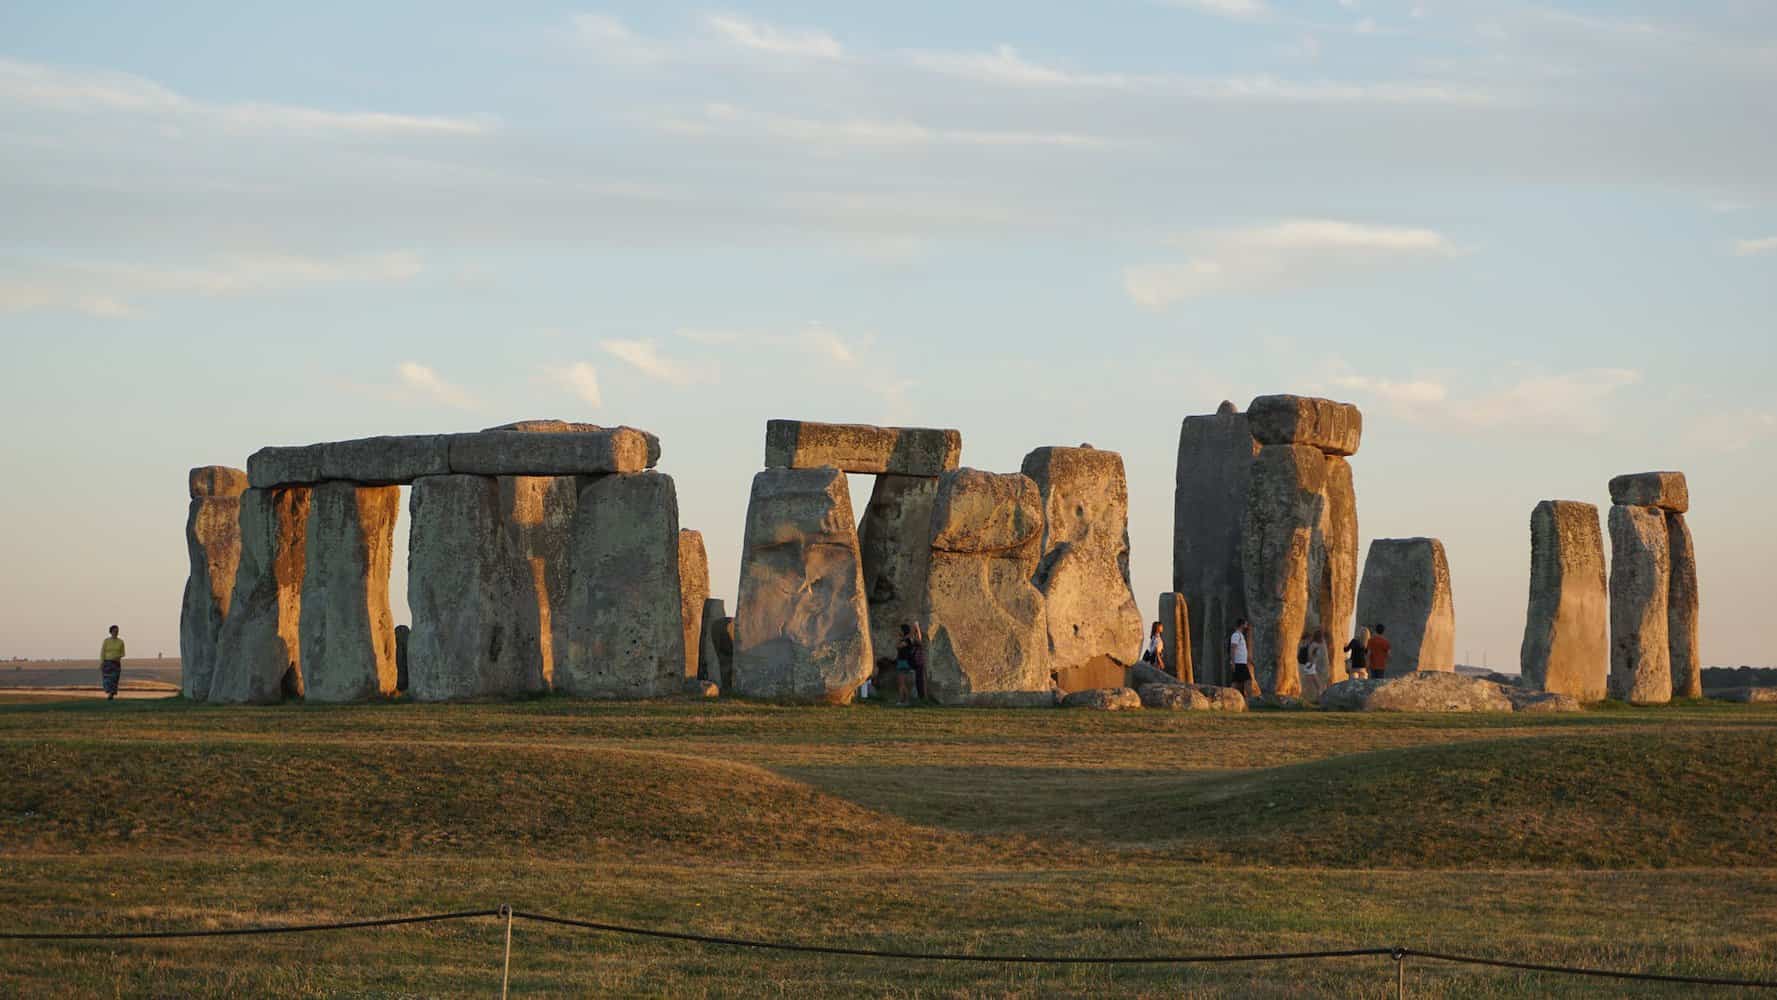 photo of people standing near stonehenge. One of the Uks pilgrimage routes.